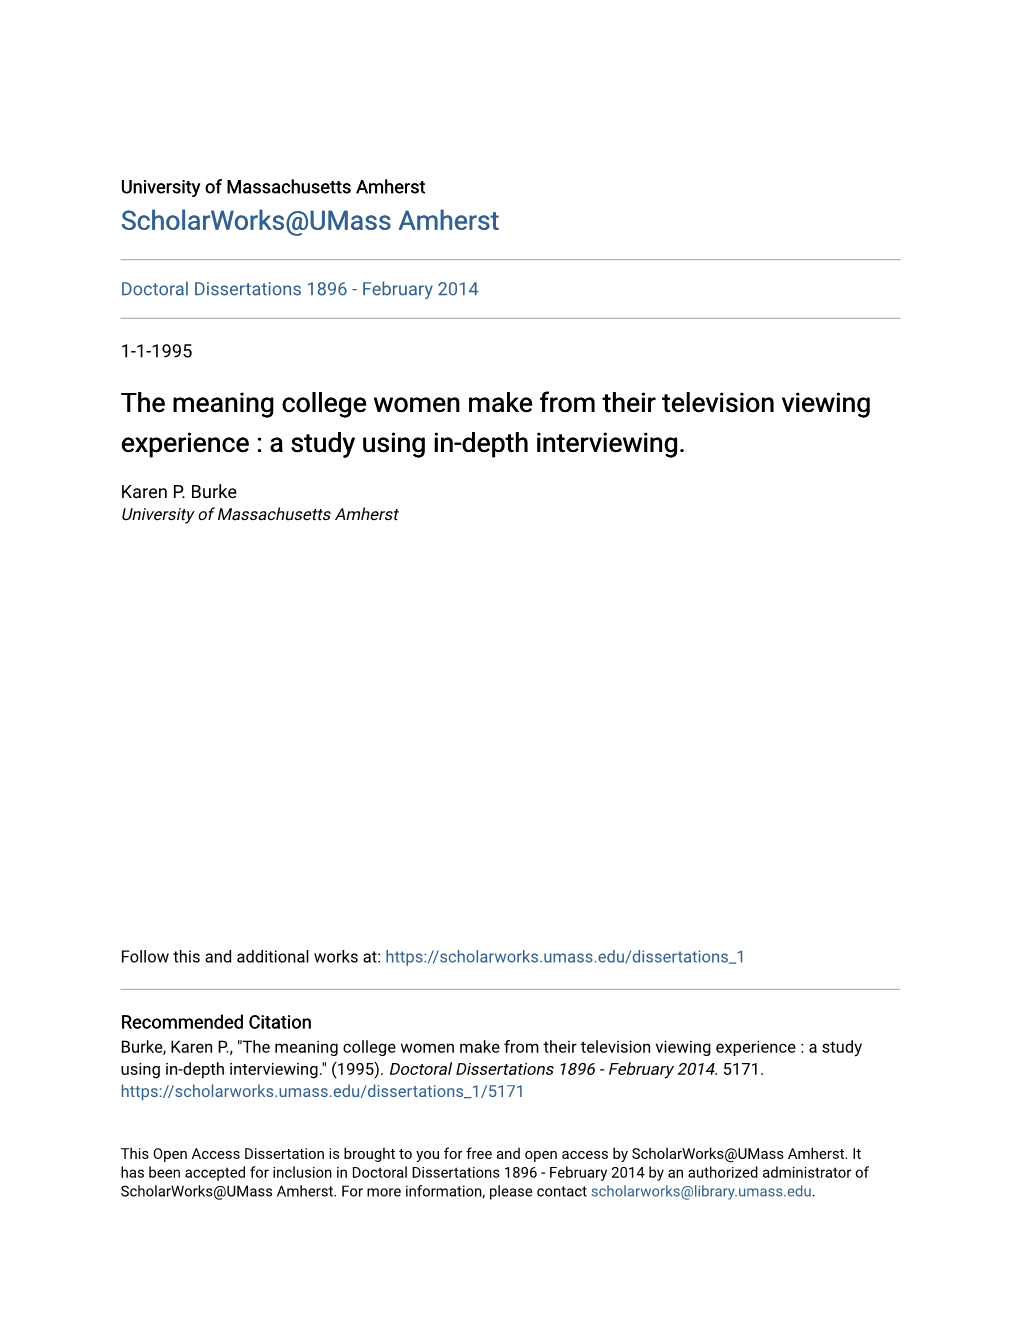 The Meaning College Women Make from Their Television Viewing Experience : a Study Using In-Depth Interviewing